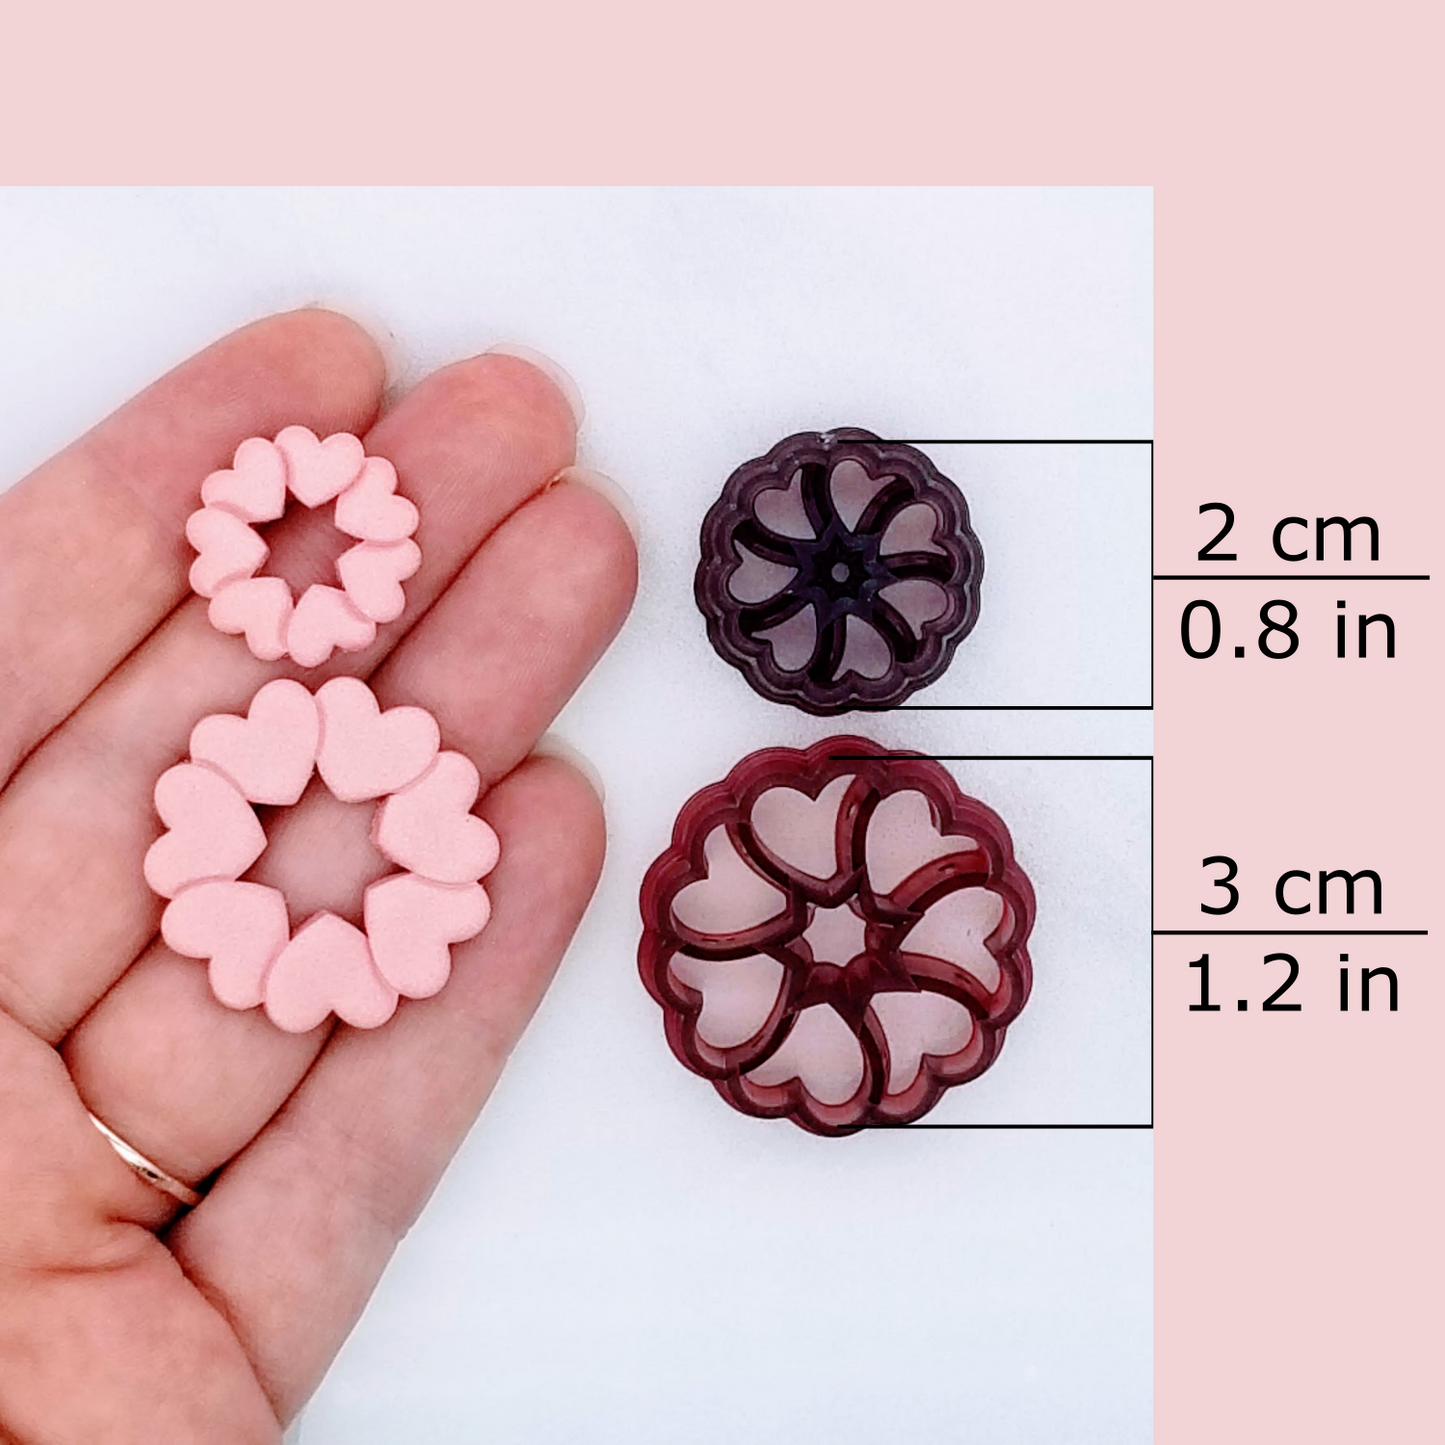 Ring of hearts clay cutter available sizes, 2 centimeters / 0.8 inches, and 3 centimeters / 1.2 inches